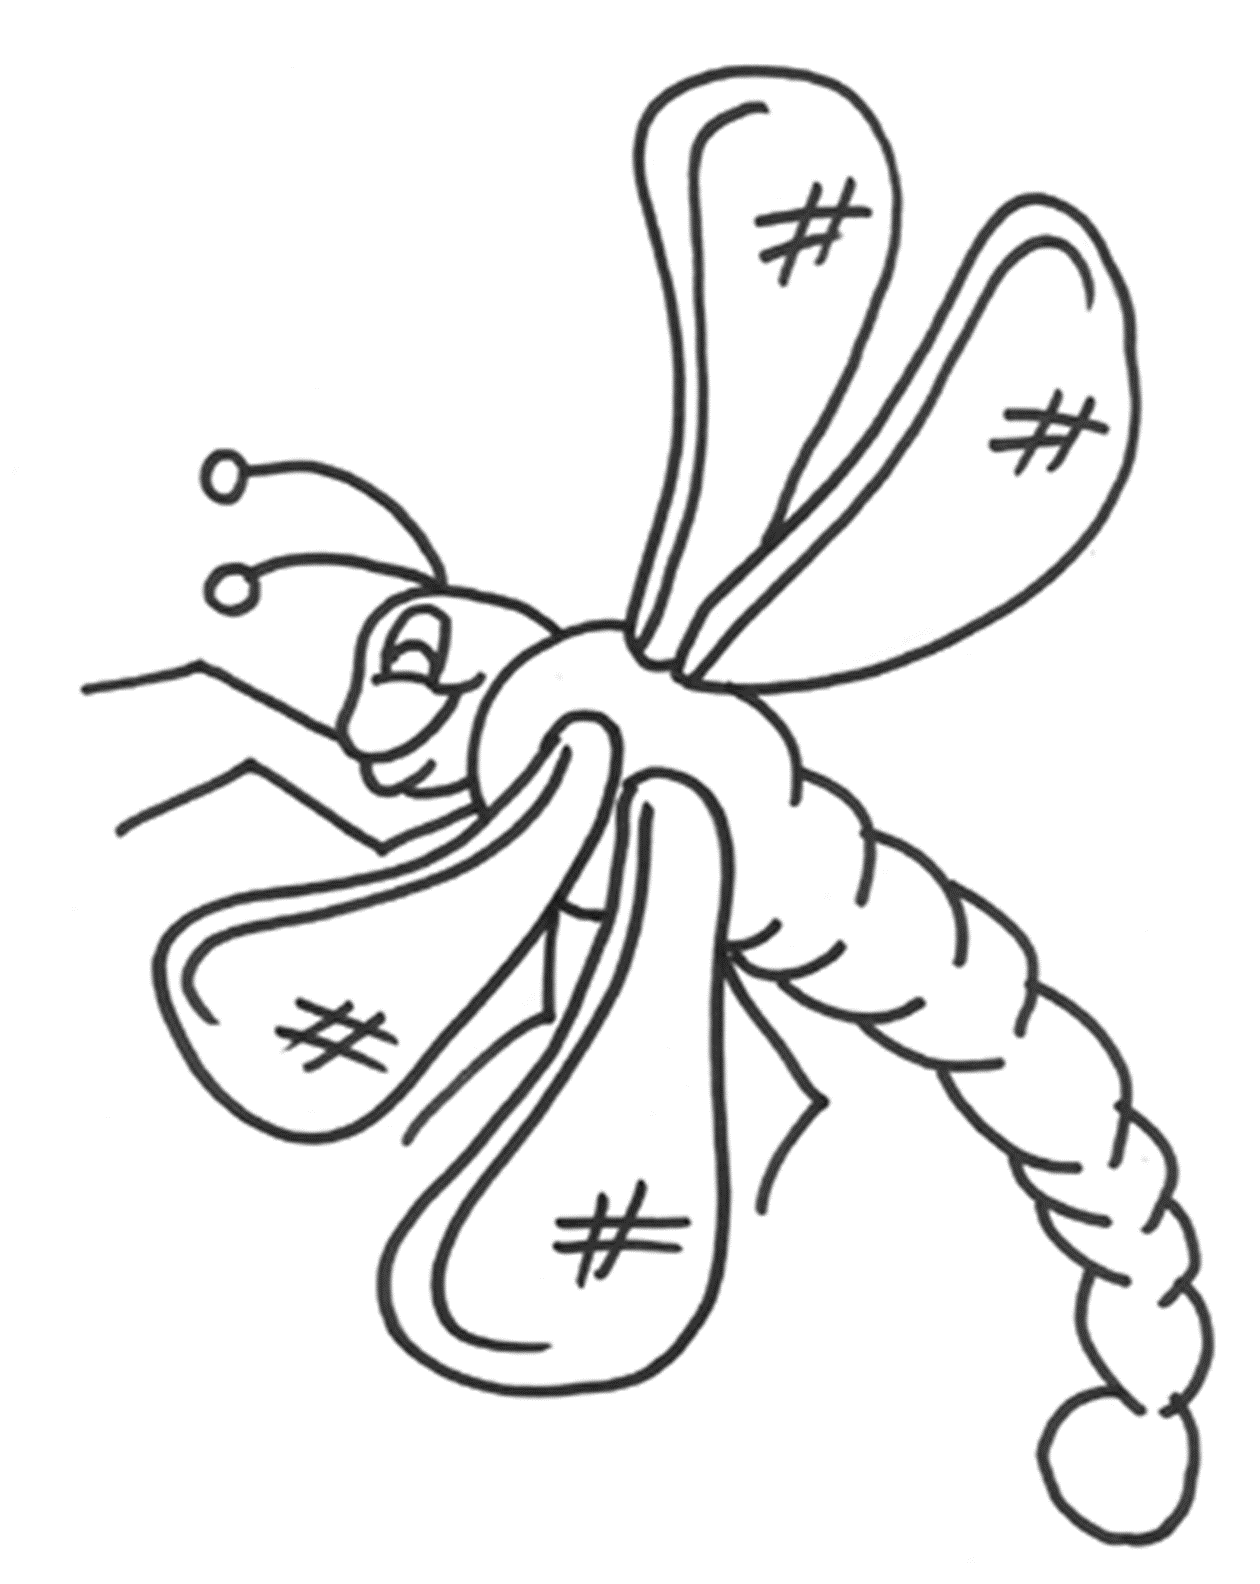 Coloring Pages Of Animals Free Dragonfly561a Coloring Page